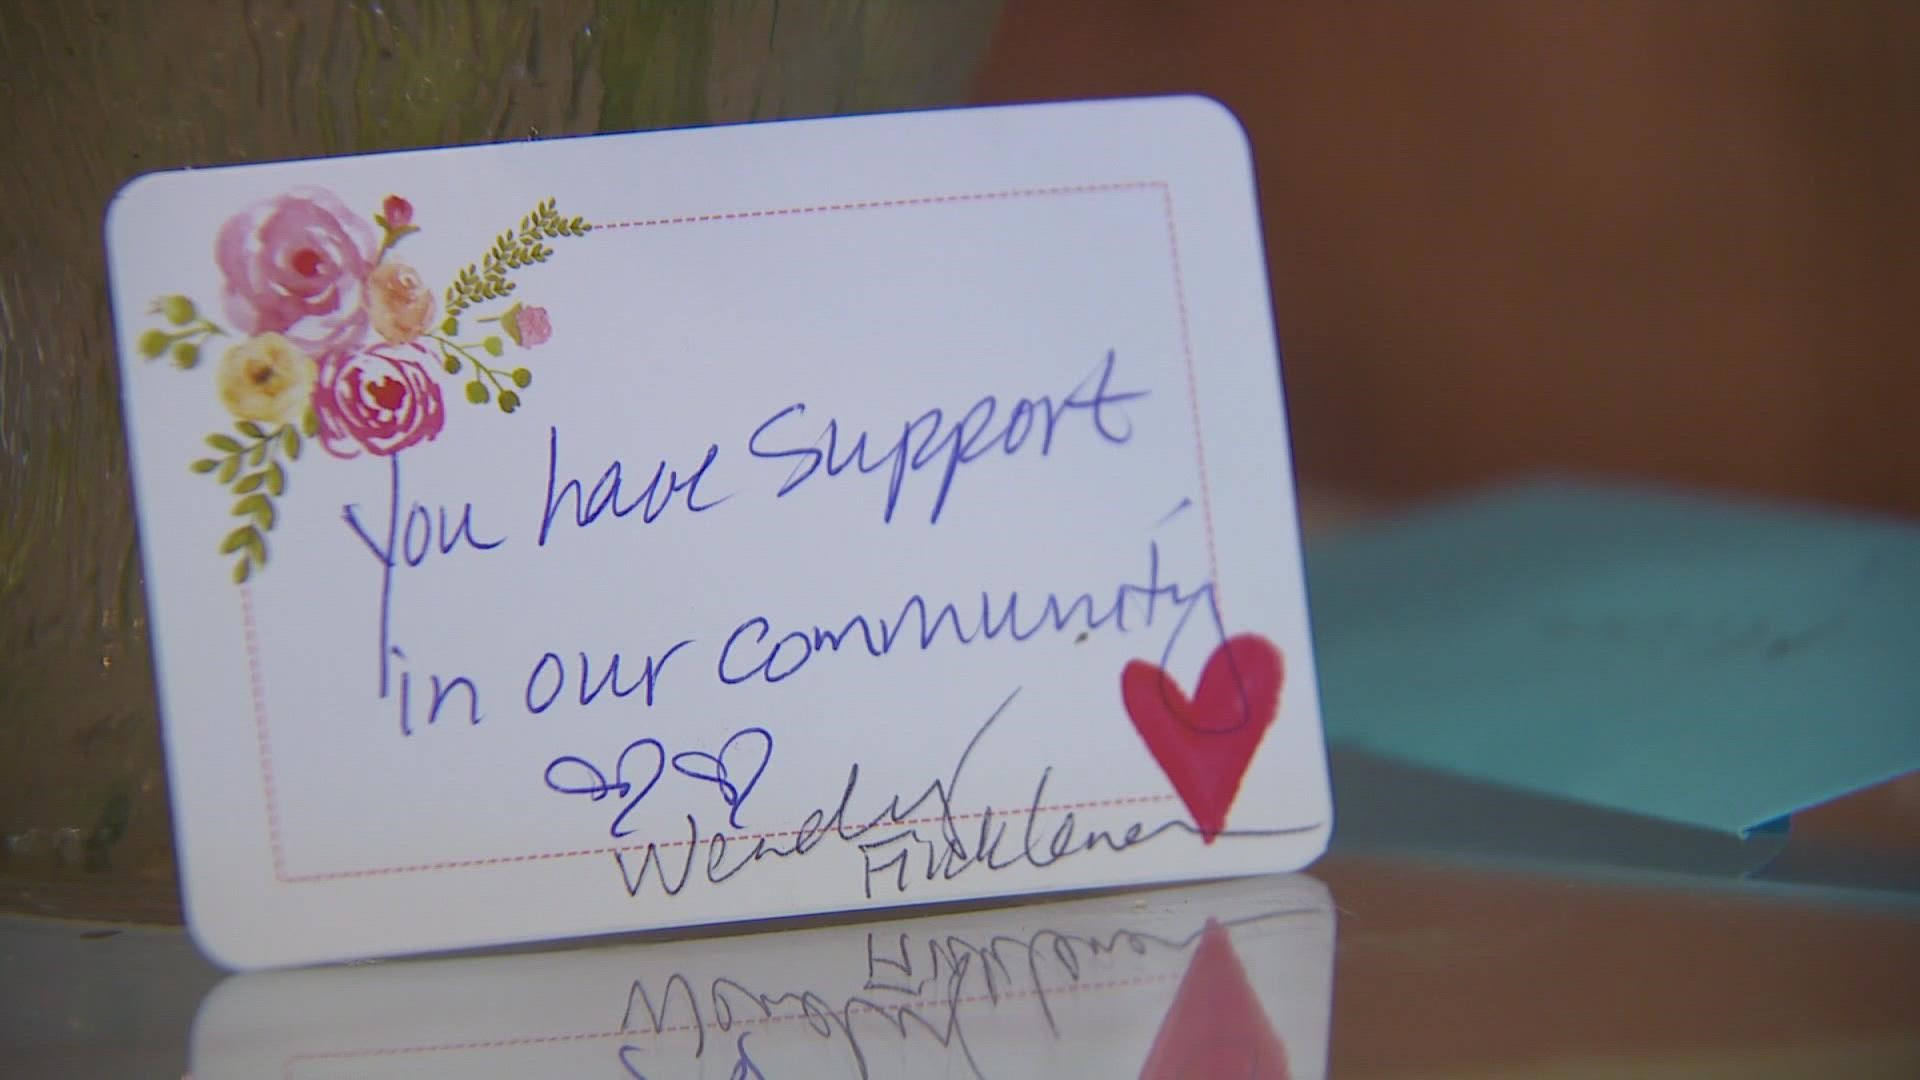 Mica's Kitchen owner Michaella Olavarri says Vashon community members have reached out to offer support in rebuilding.